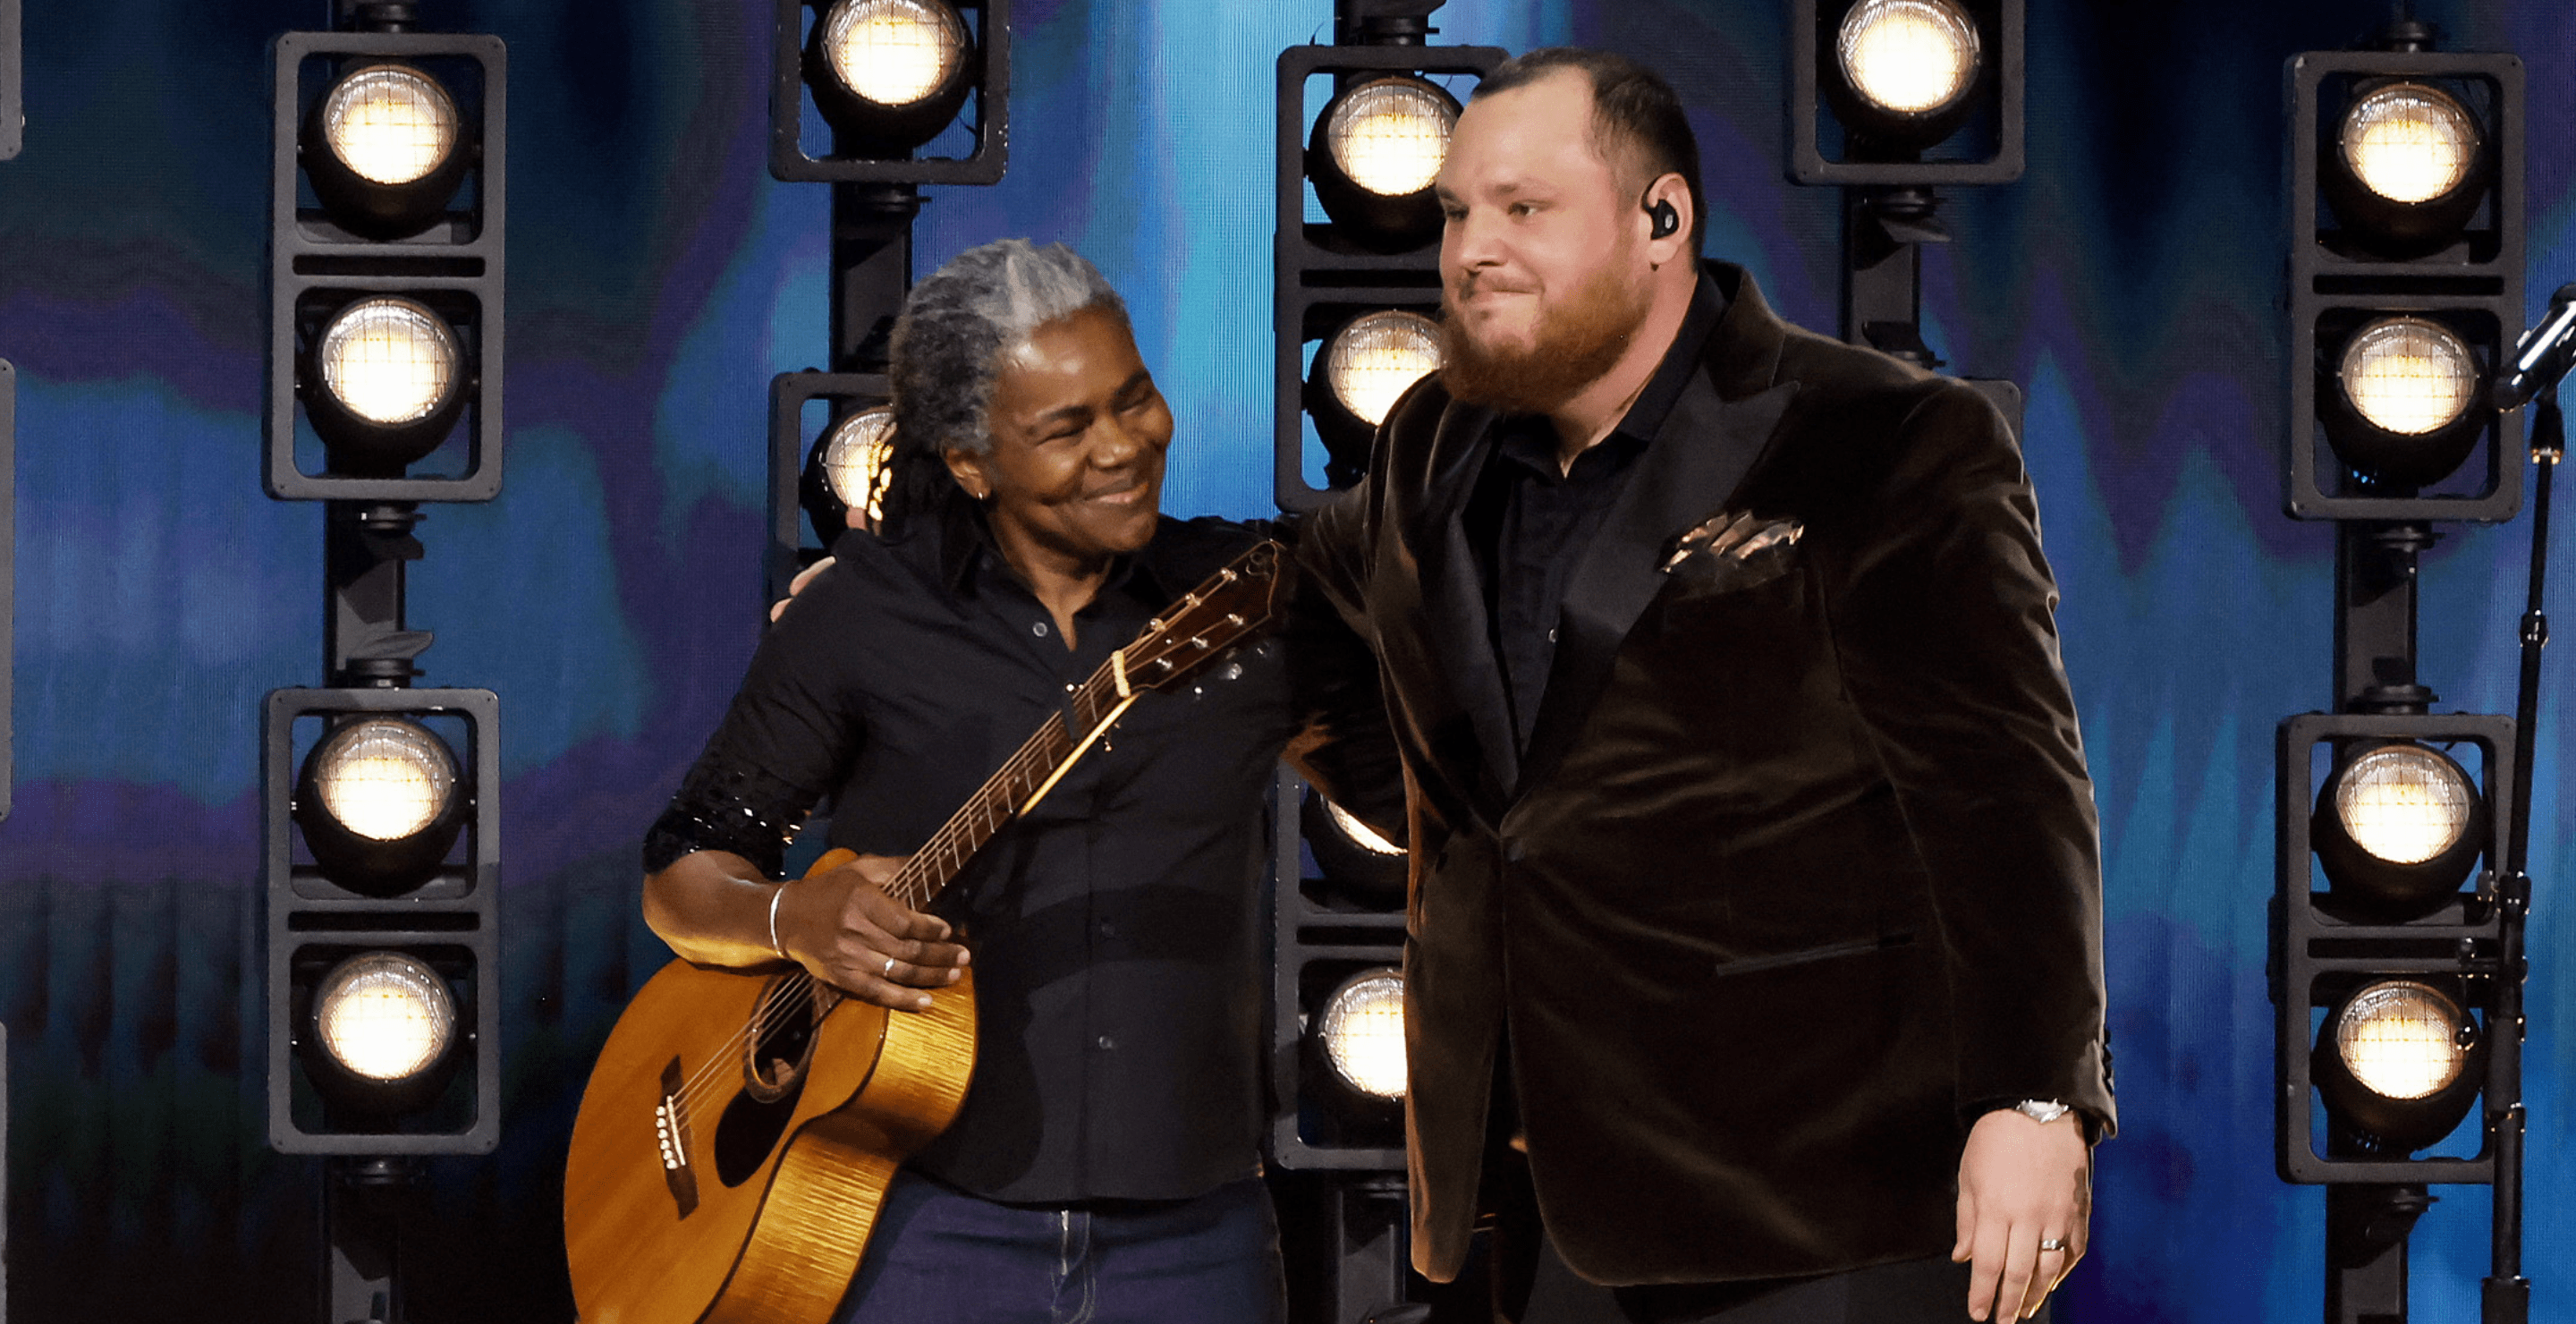 Tracy Chapman + Luke Combs Perform 'Fast Car' at Grammys